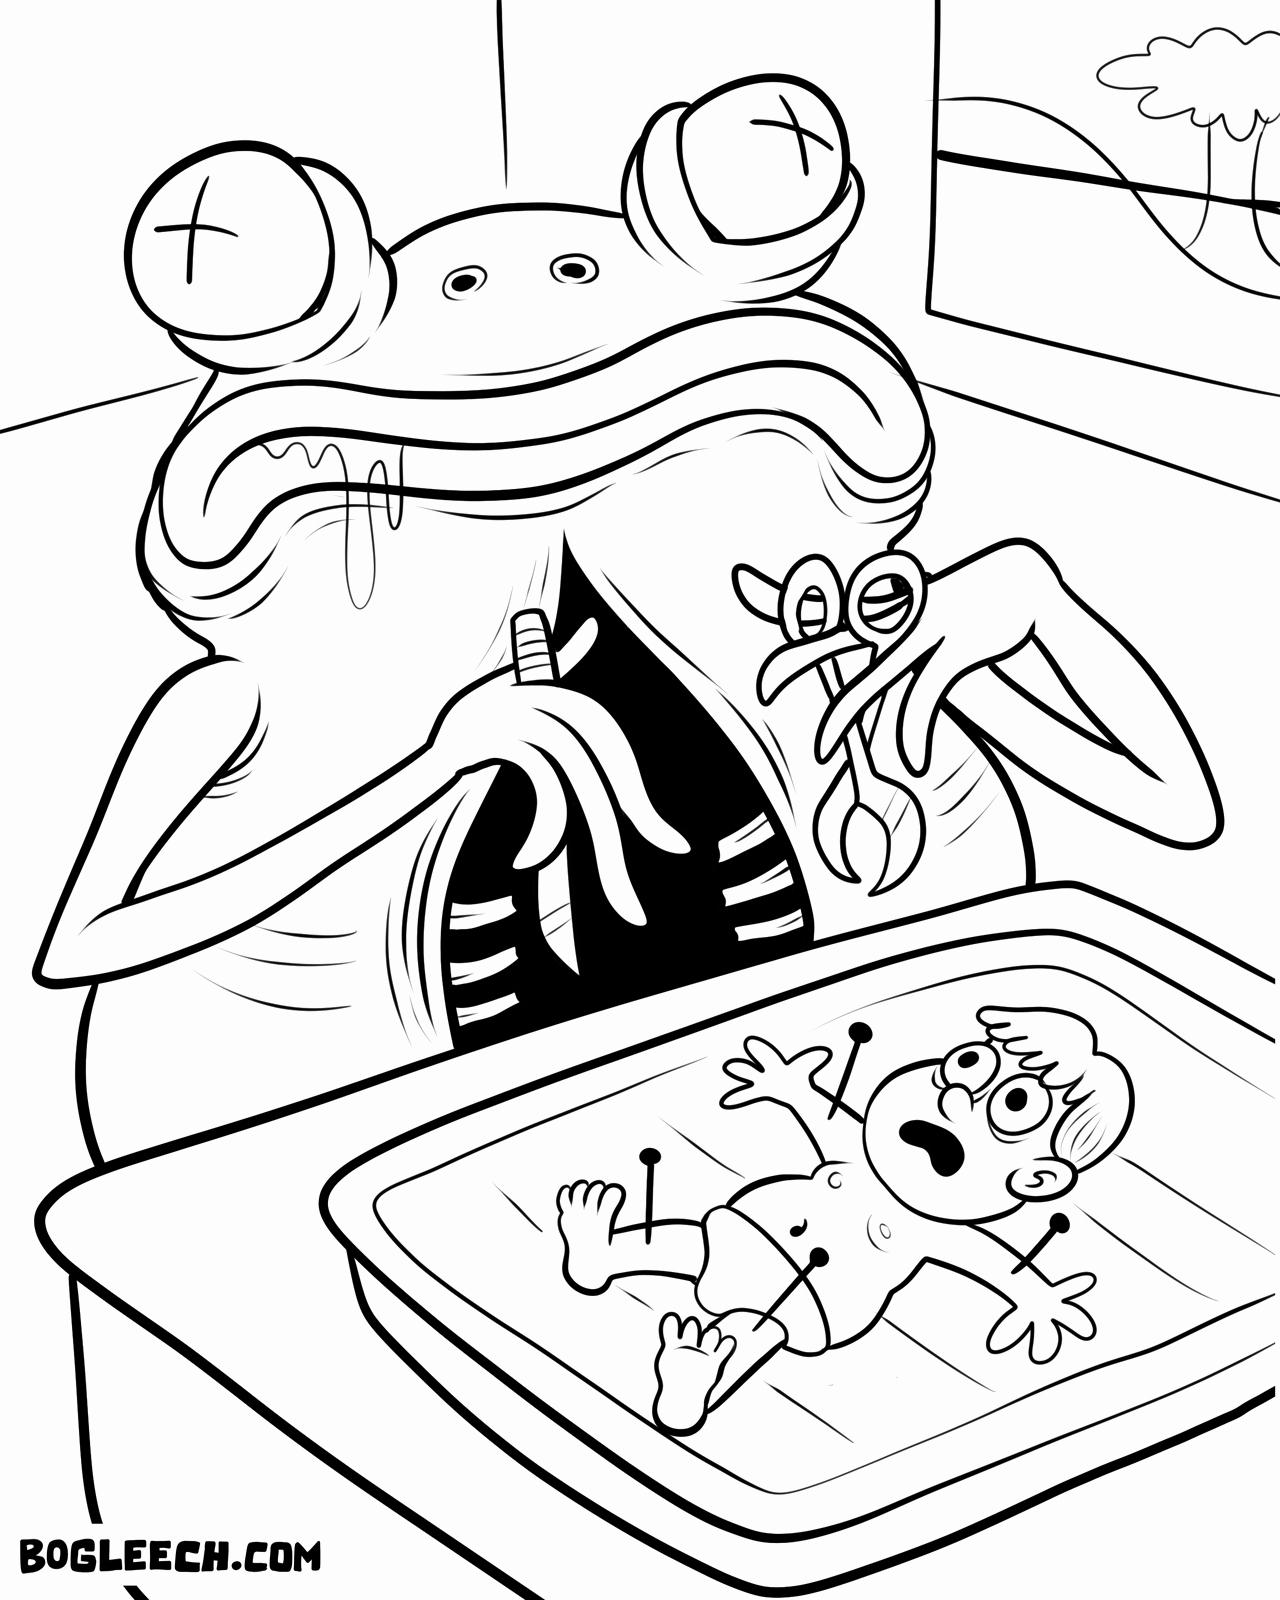 Horror Movie Coloring Pages at Free printable